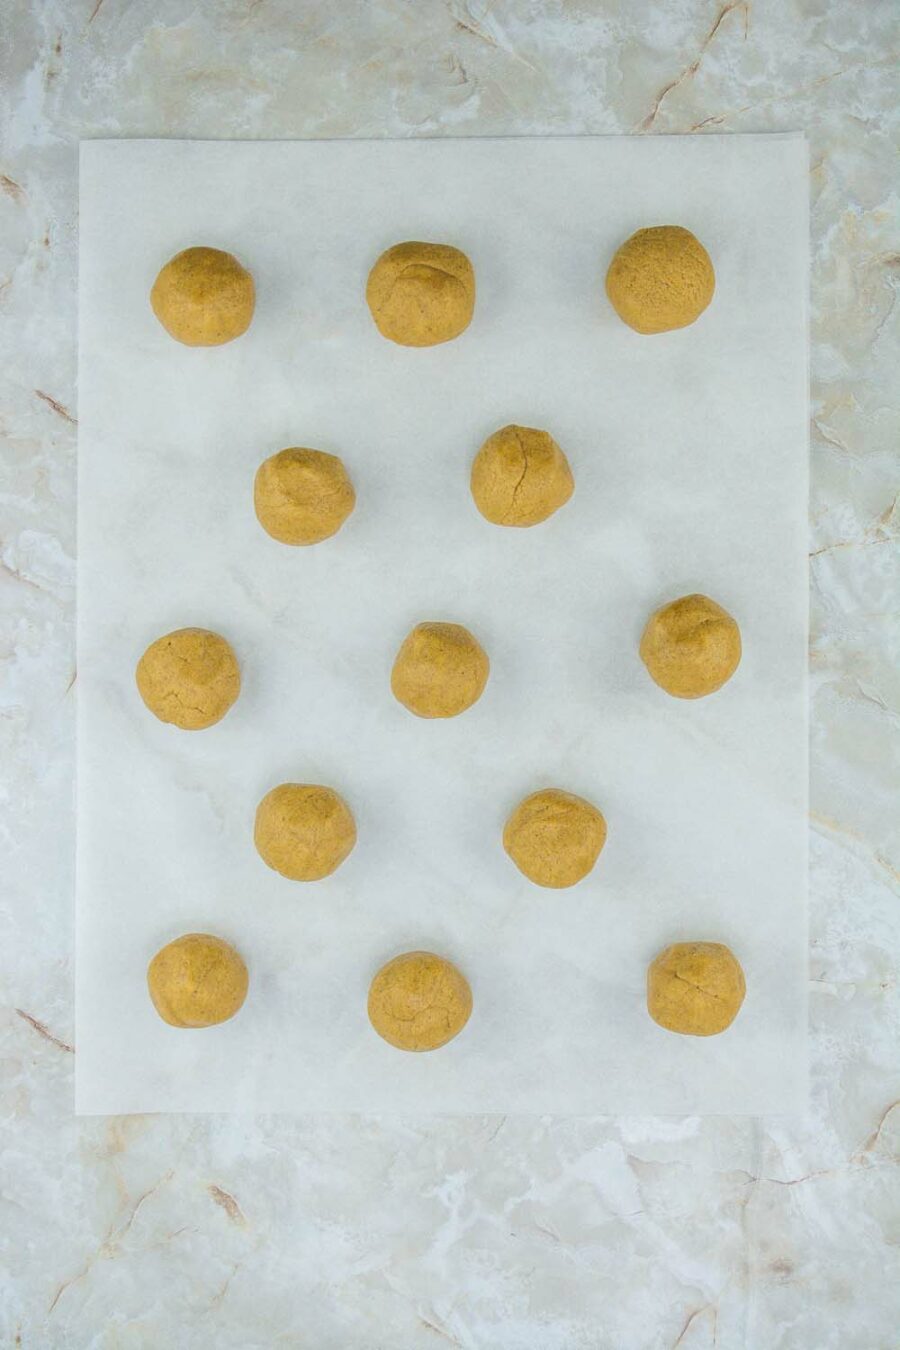 Balls of gingersnap cookie dough on parchment paper